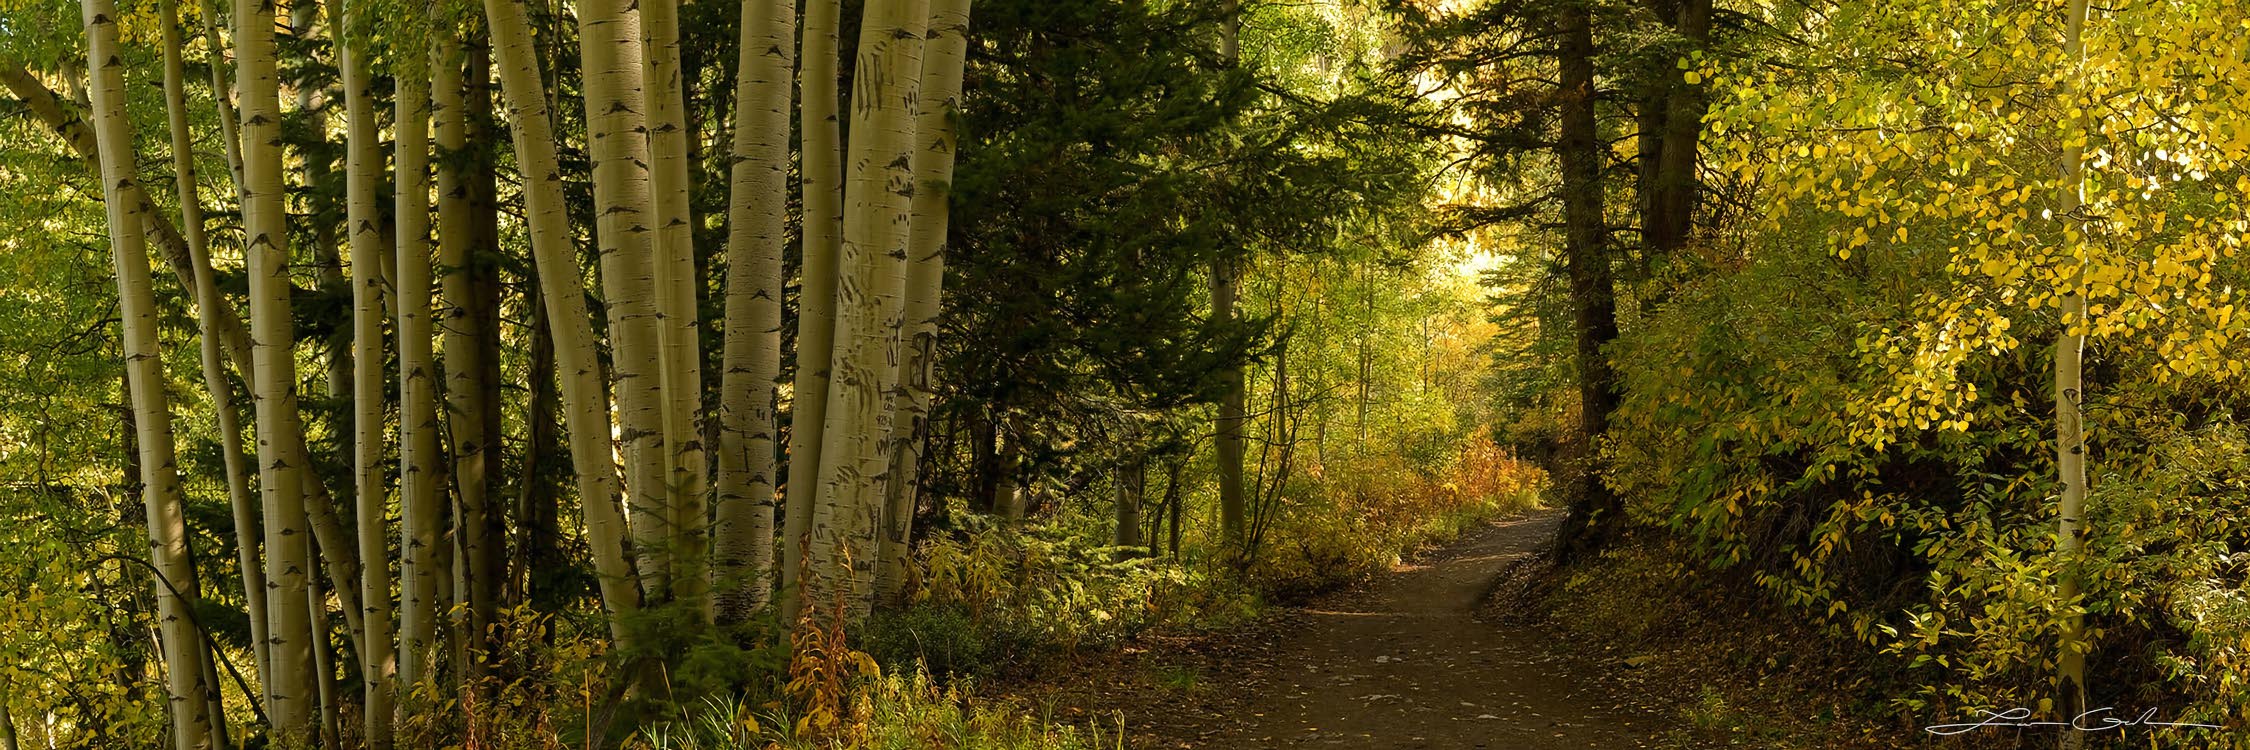 A curving path through an aspen forest and sunshine